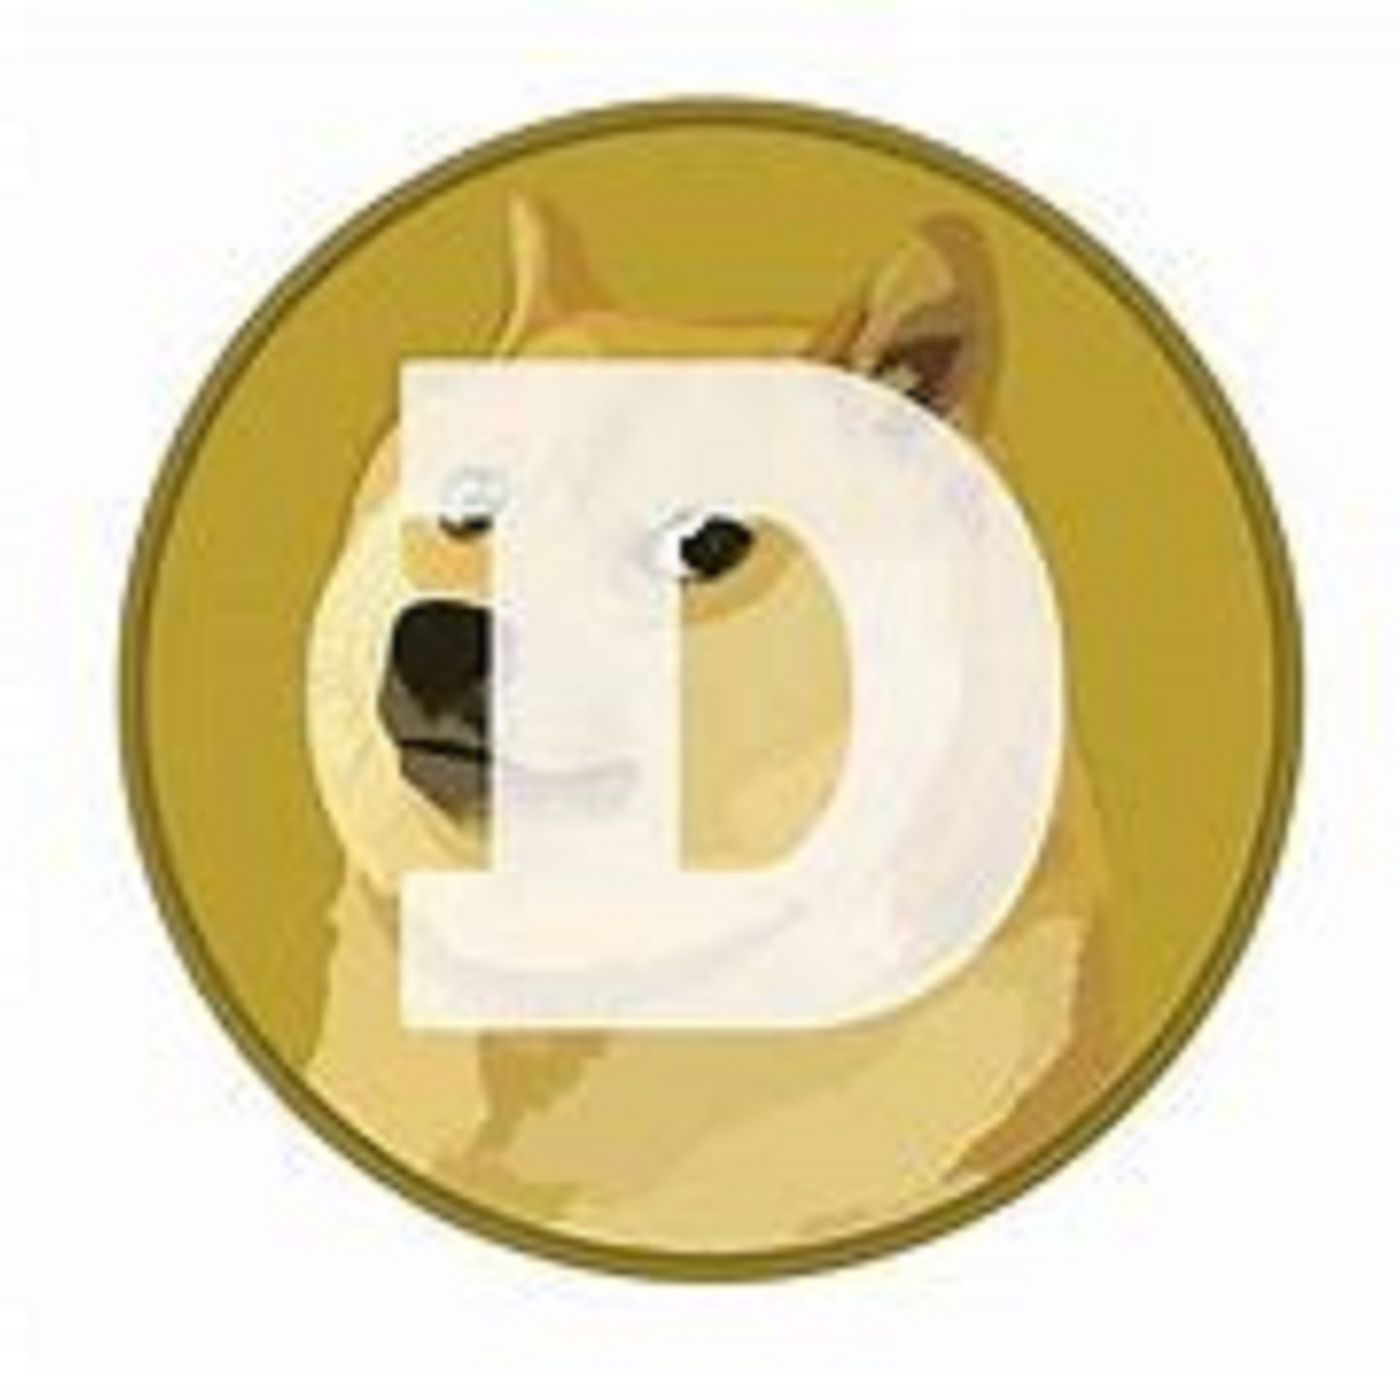 Dogecoin Price Soars 25%, Why DOGE Bulls Are Not Done Yet